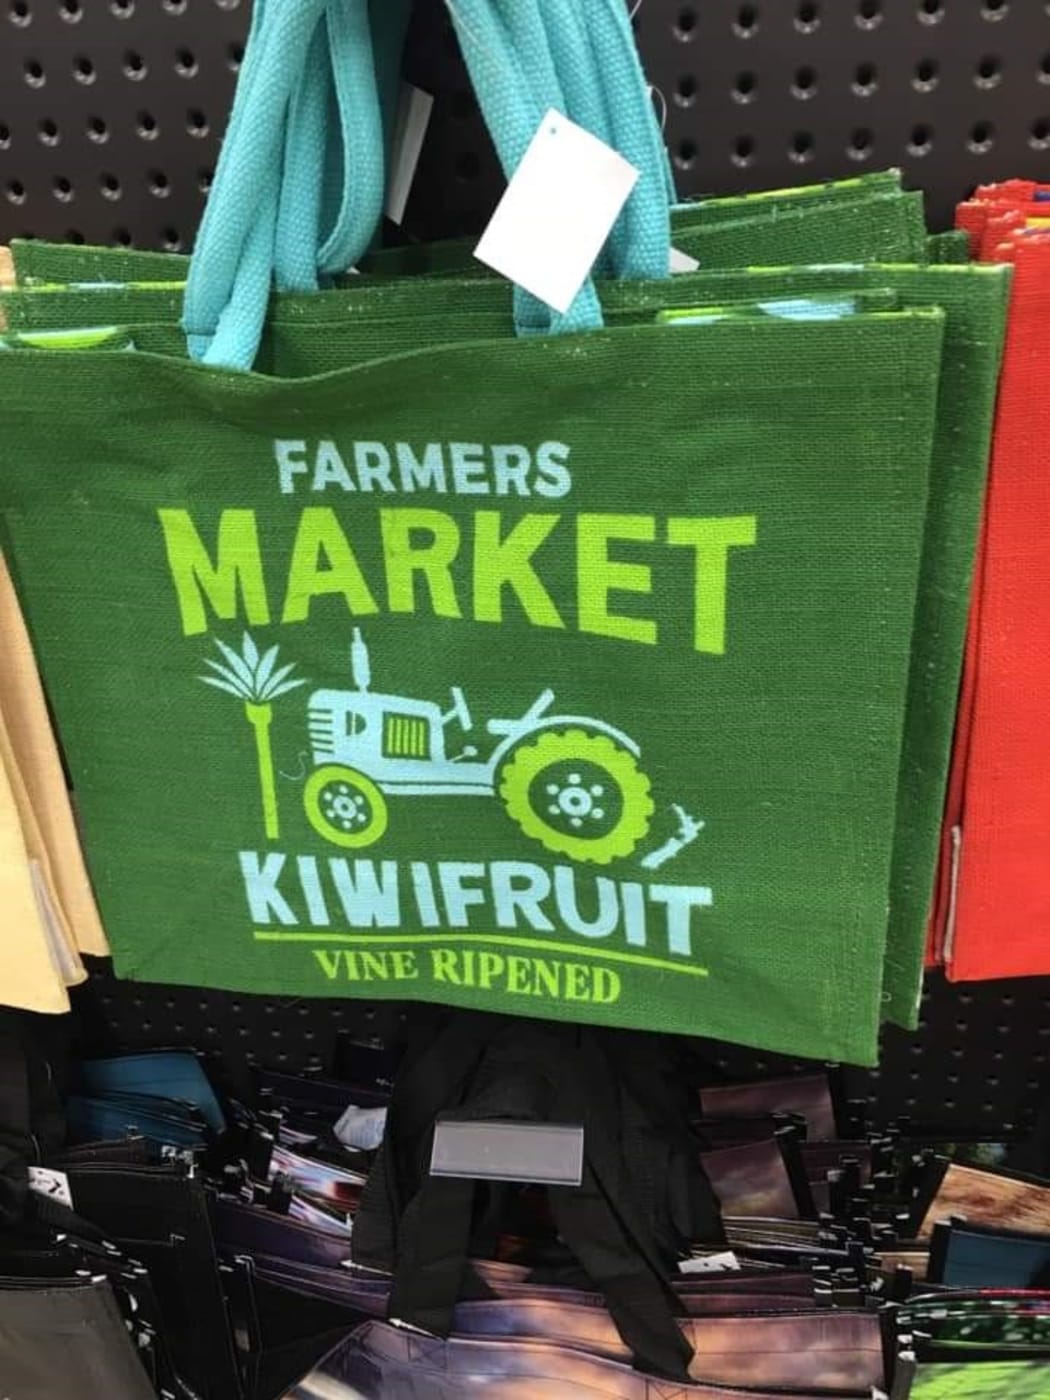 In some stores, Countdown is selling re-usable jute shopping bags that have the words "FARMERS MARKET" printed on them as part of the design.